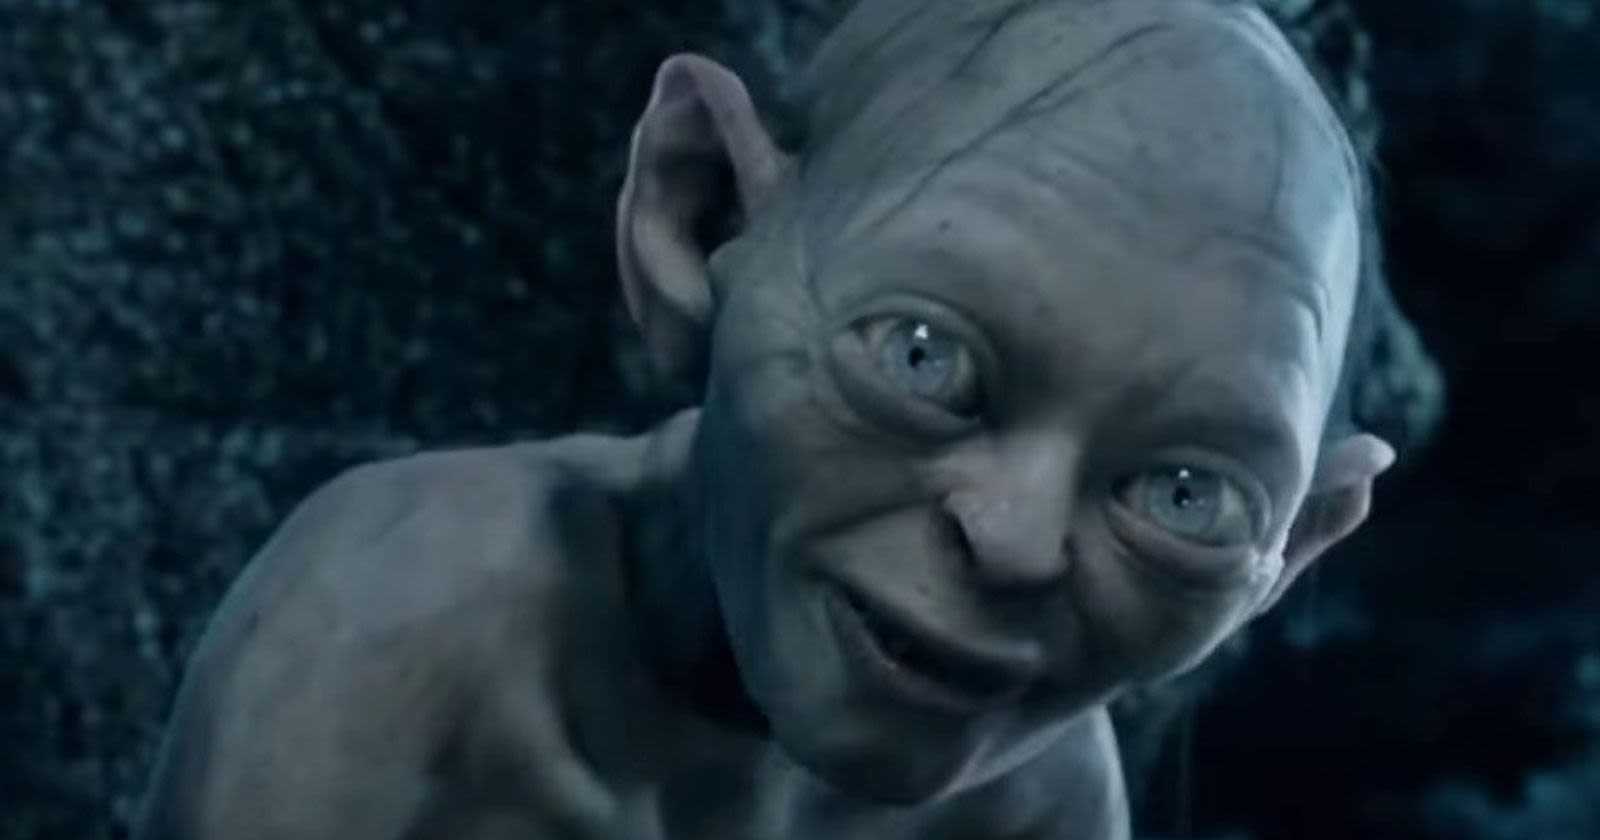 Warner Bros. Announces New Lord of the Rings Movie, Andy Serkis to Direct